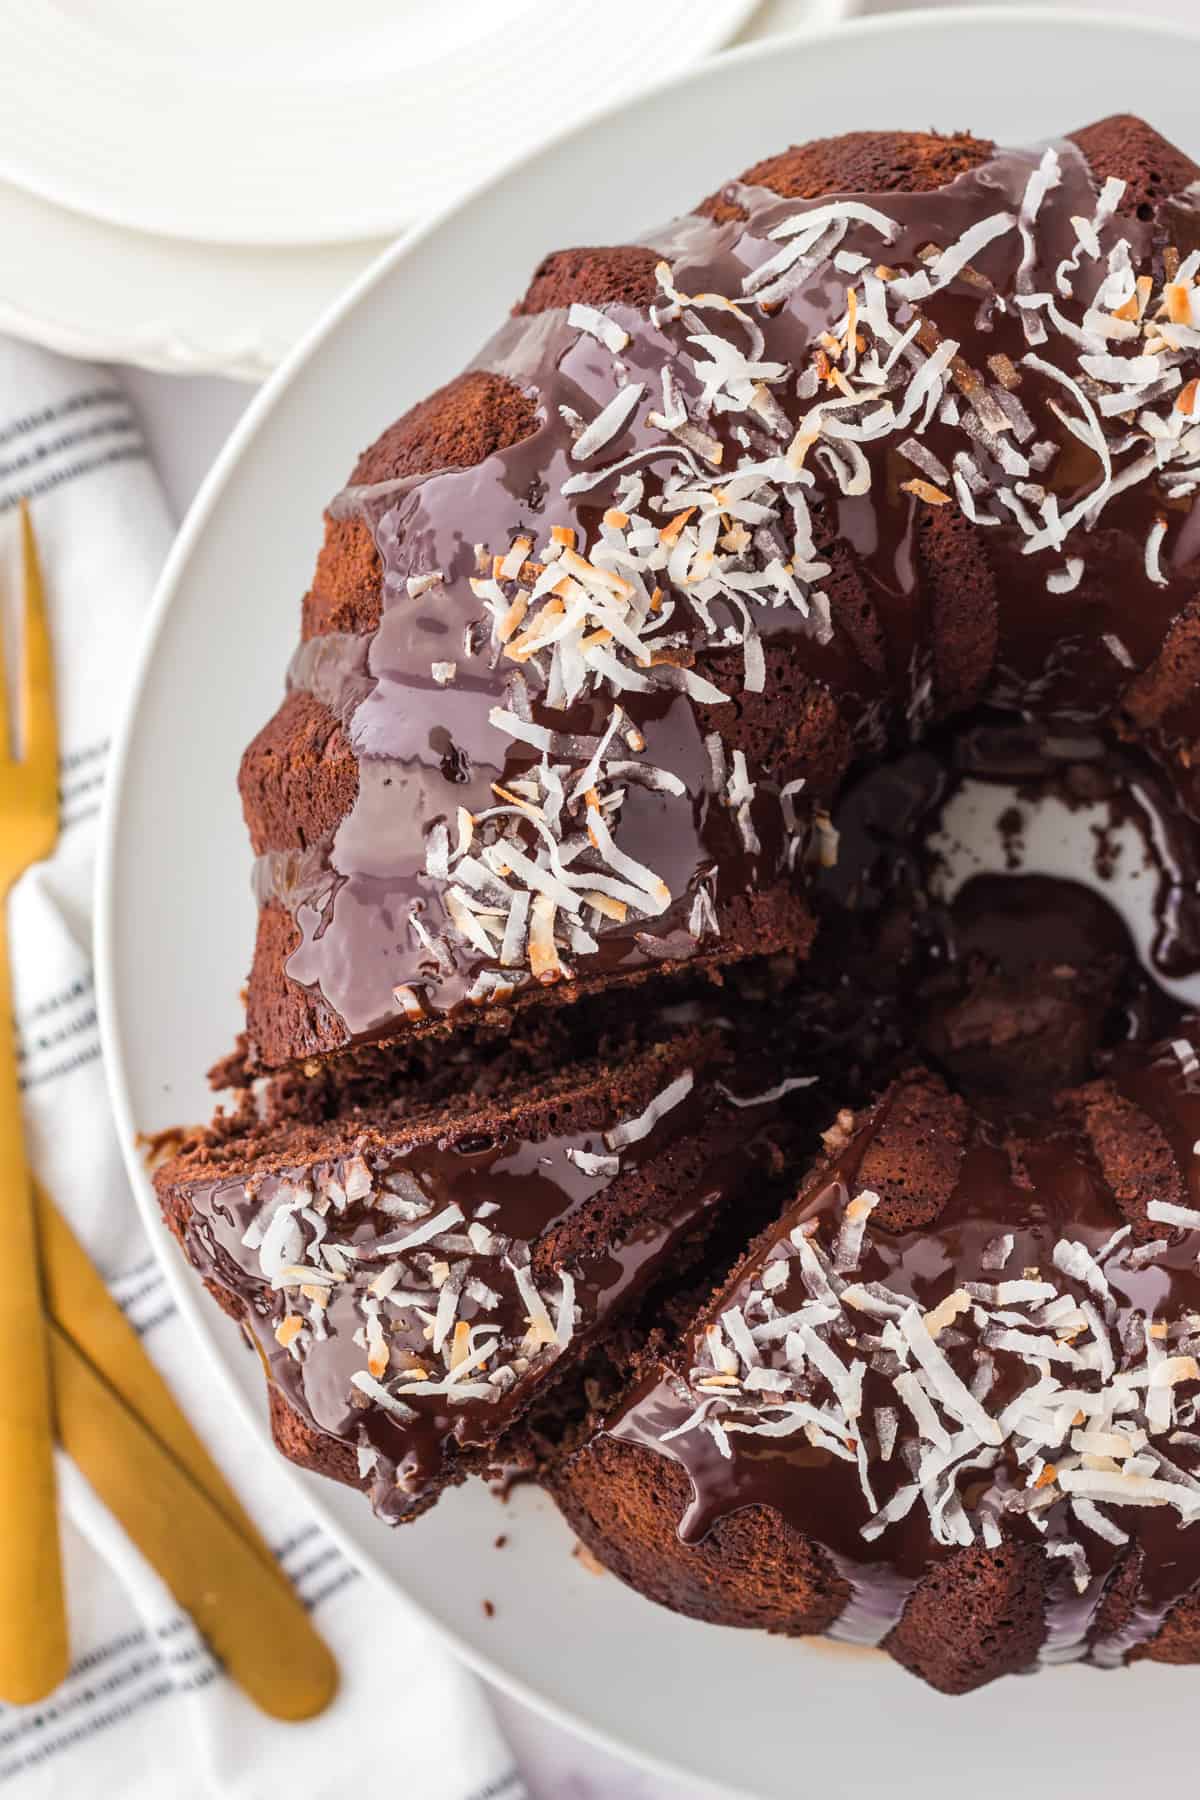 Chocolate coconut bundt cake with chocolate ganache and toasted coconut with a single slice cut out.